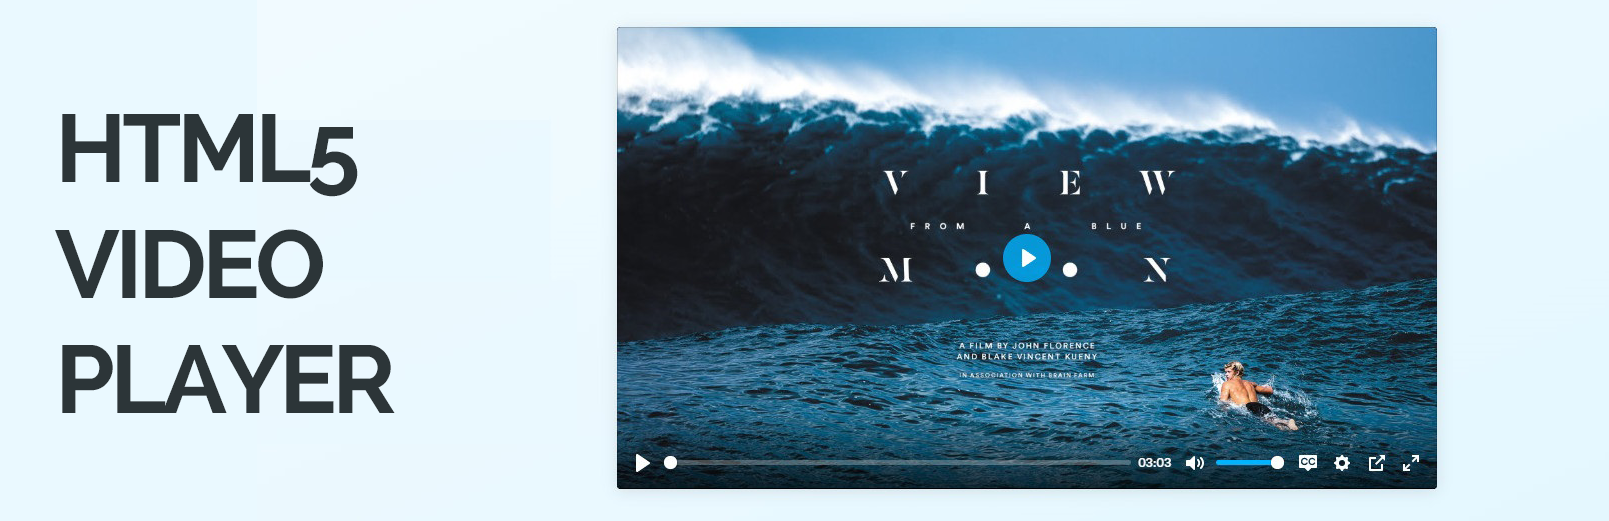 HTML5 Video Player – mp4 Video Player Plugin and Block